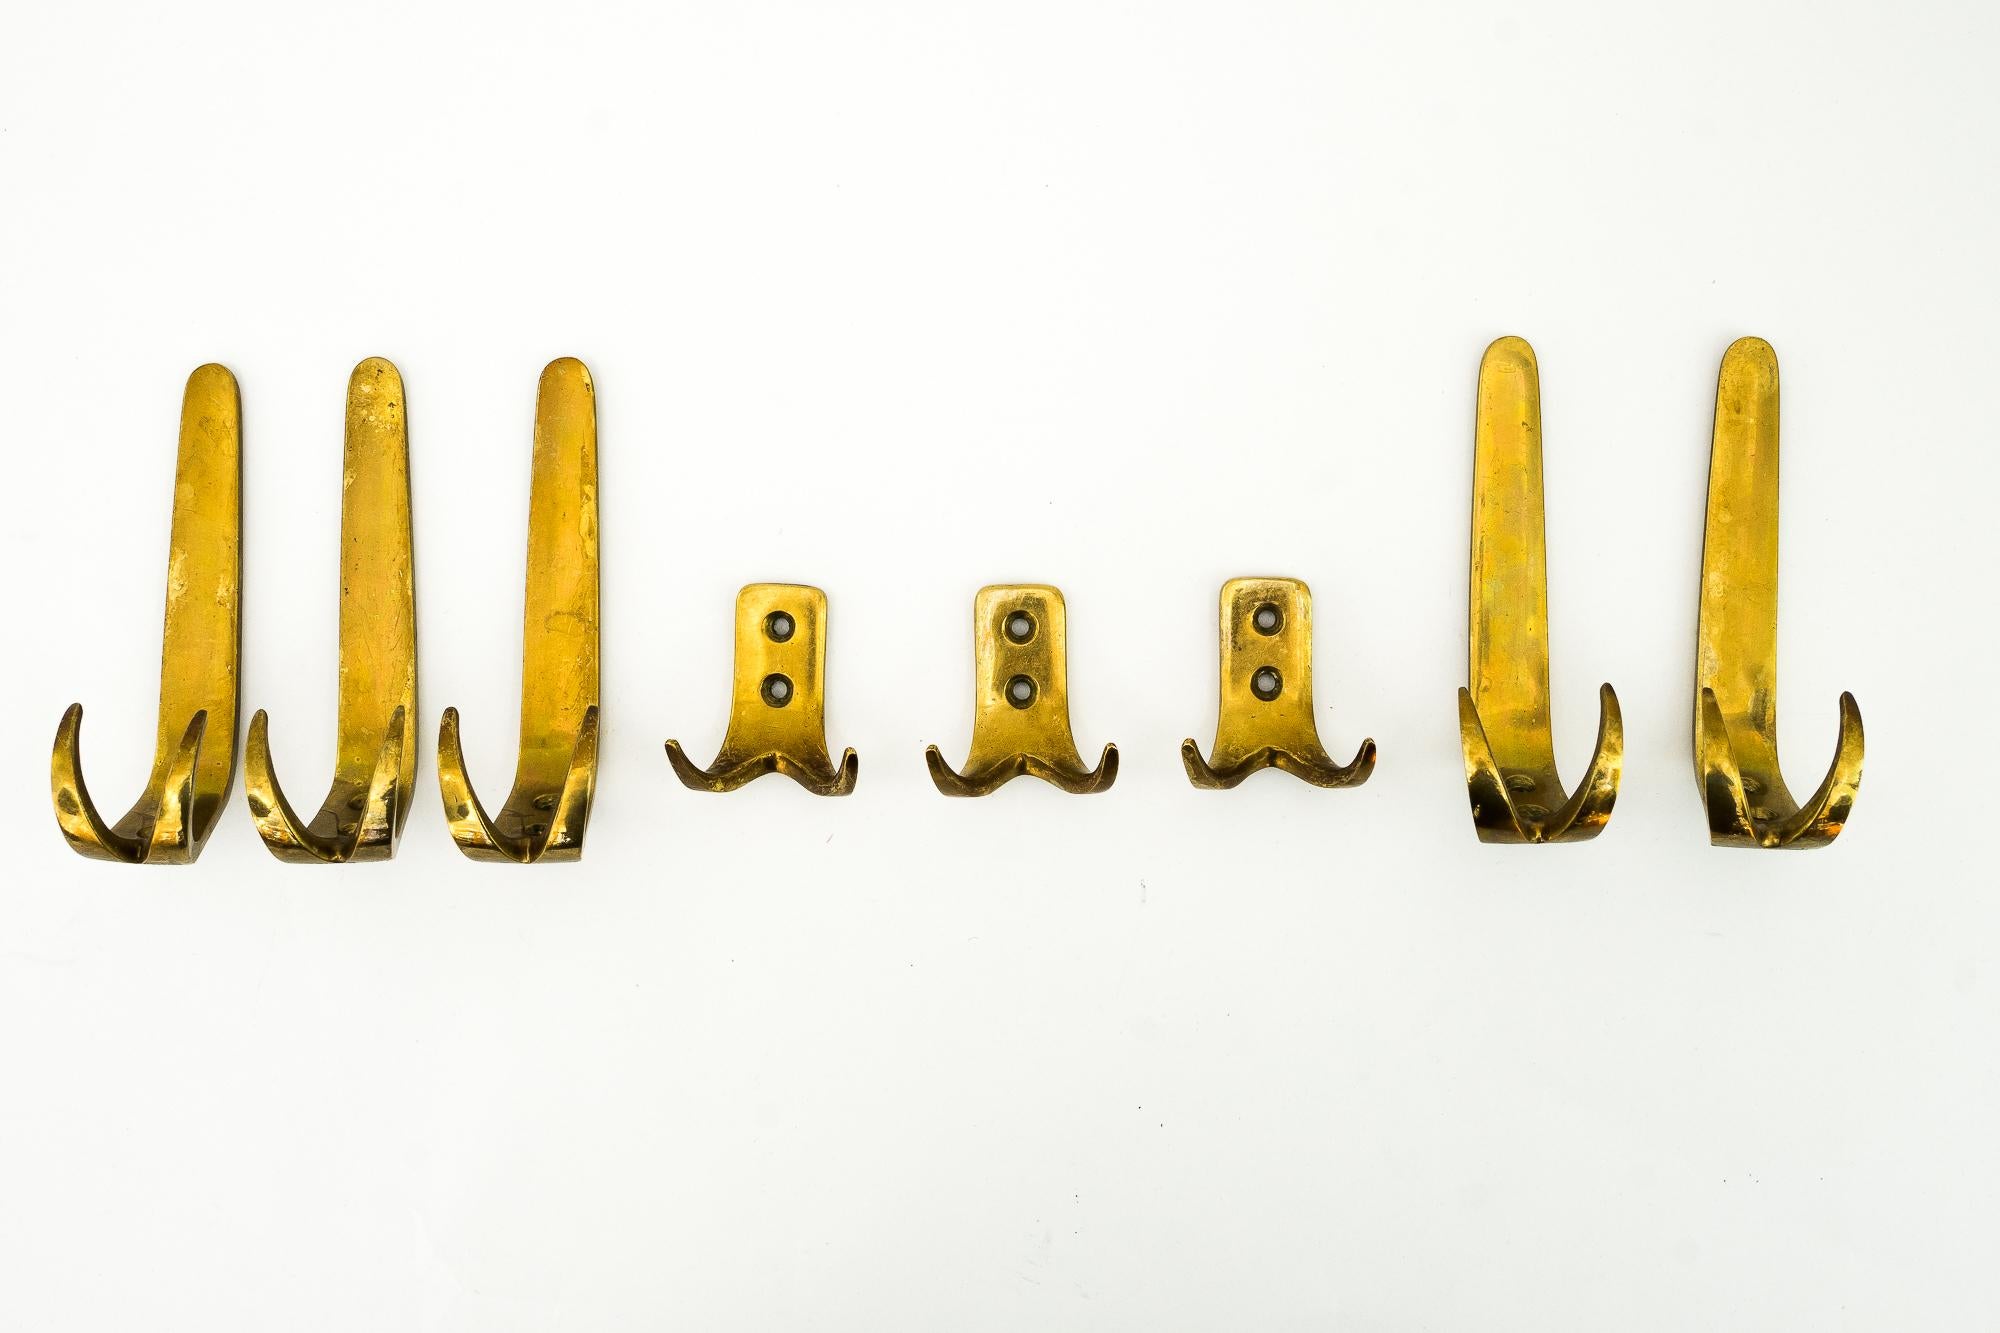 8 wall hooks, Vienna, around 1950s
Original condition
Price is for all together
The bigger ones
Measures: H 10cm
W 3.5cm
D 10cm
The smaller ones
H 5cm
W 4.5cm
D 4cm.